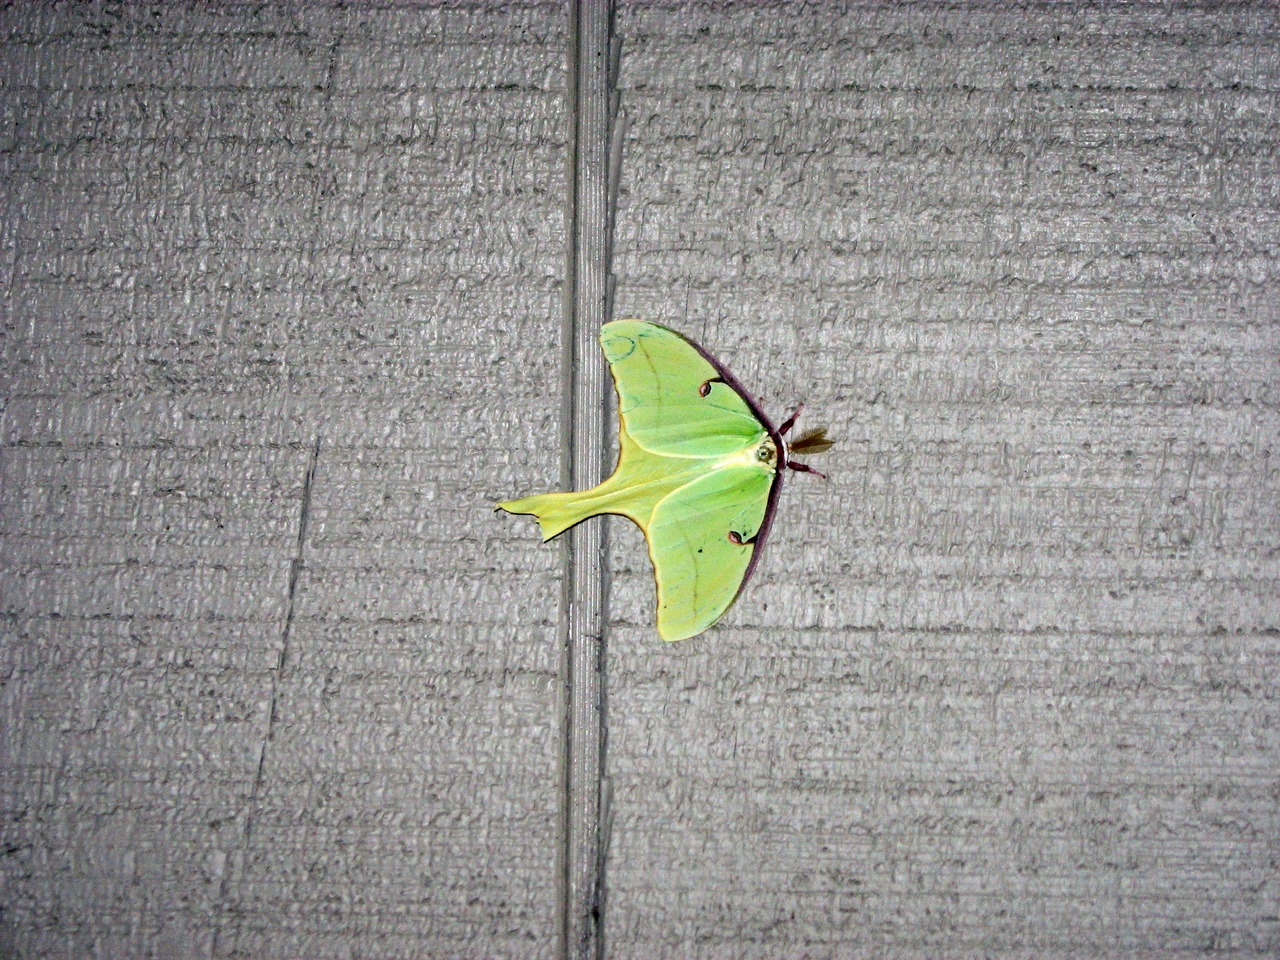 Luna Moth (Actias luna) on the wall of the stairway to my apartment.